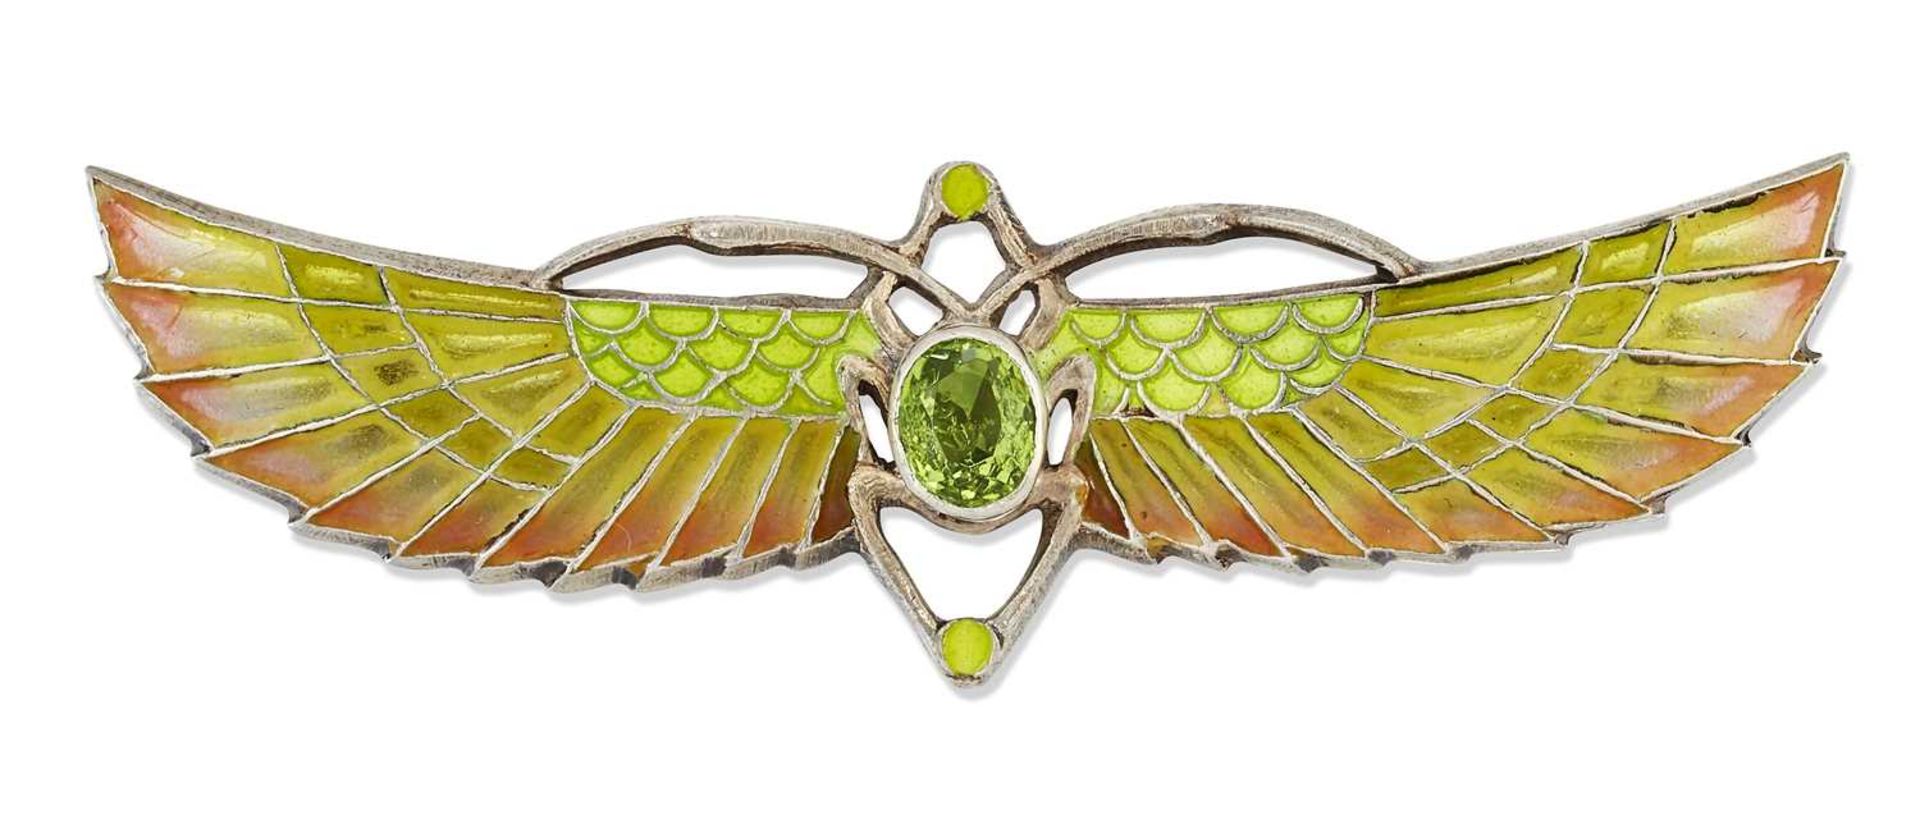 AN EGYPTIAN REVIVAL PLIQUE A JOUR ENAMEL AND PASTE WINGED SCARAB BROOCH